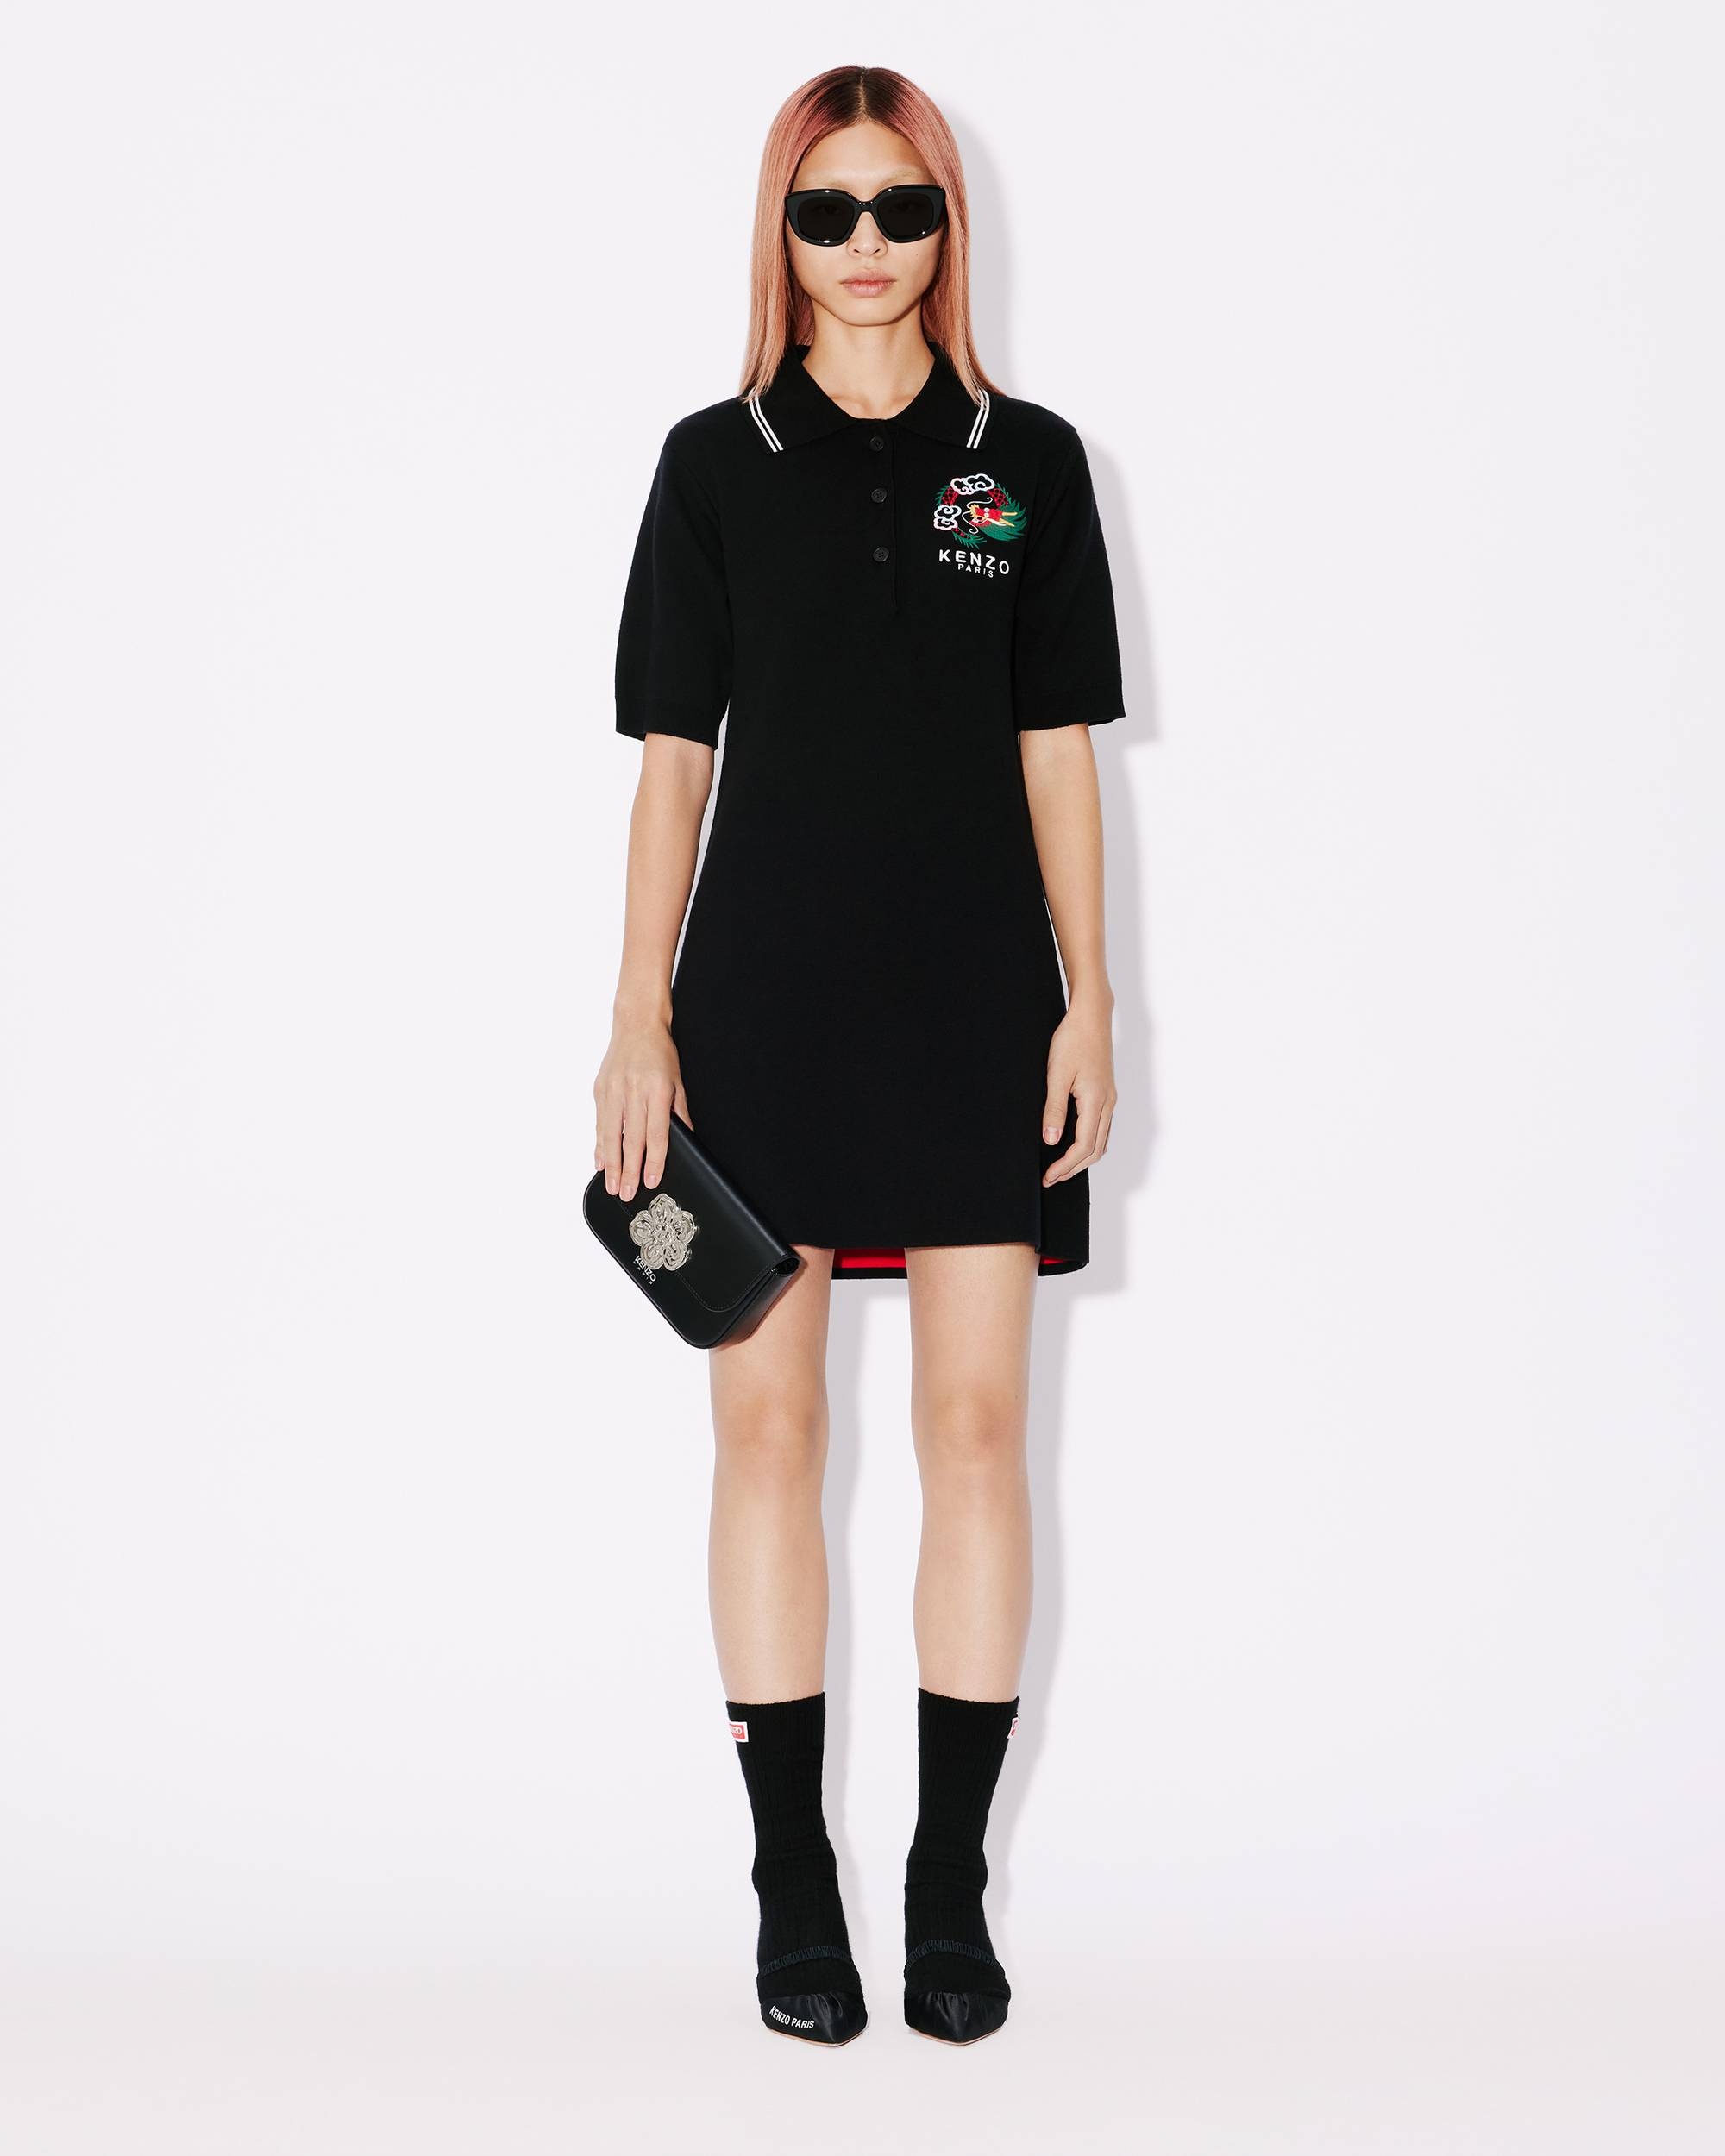 'Year of the Dragon' polo dress - 3